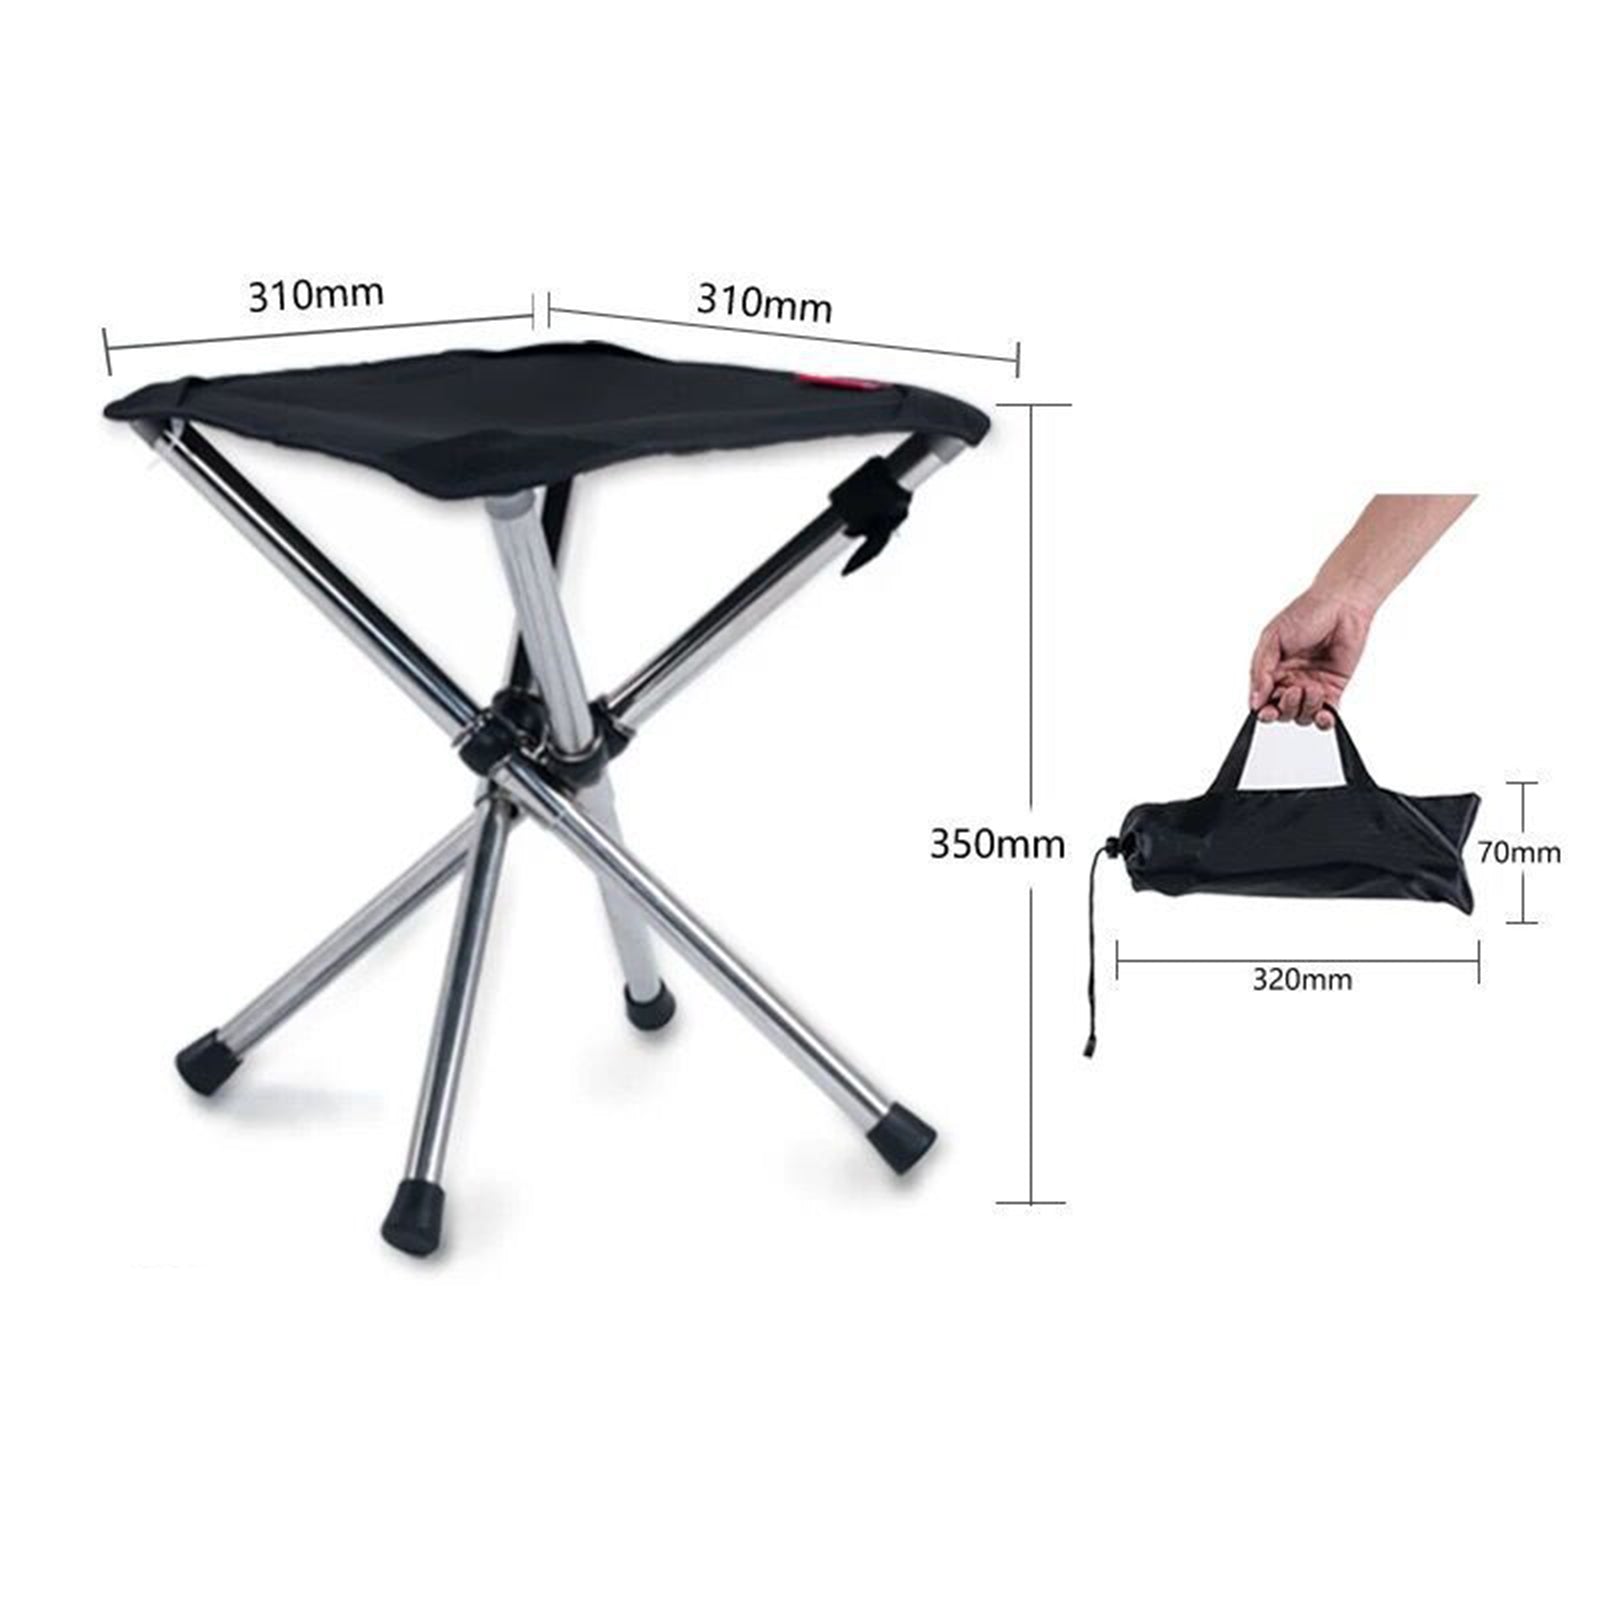 Tie Stainless Steel Camping Chair Bench